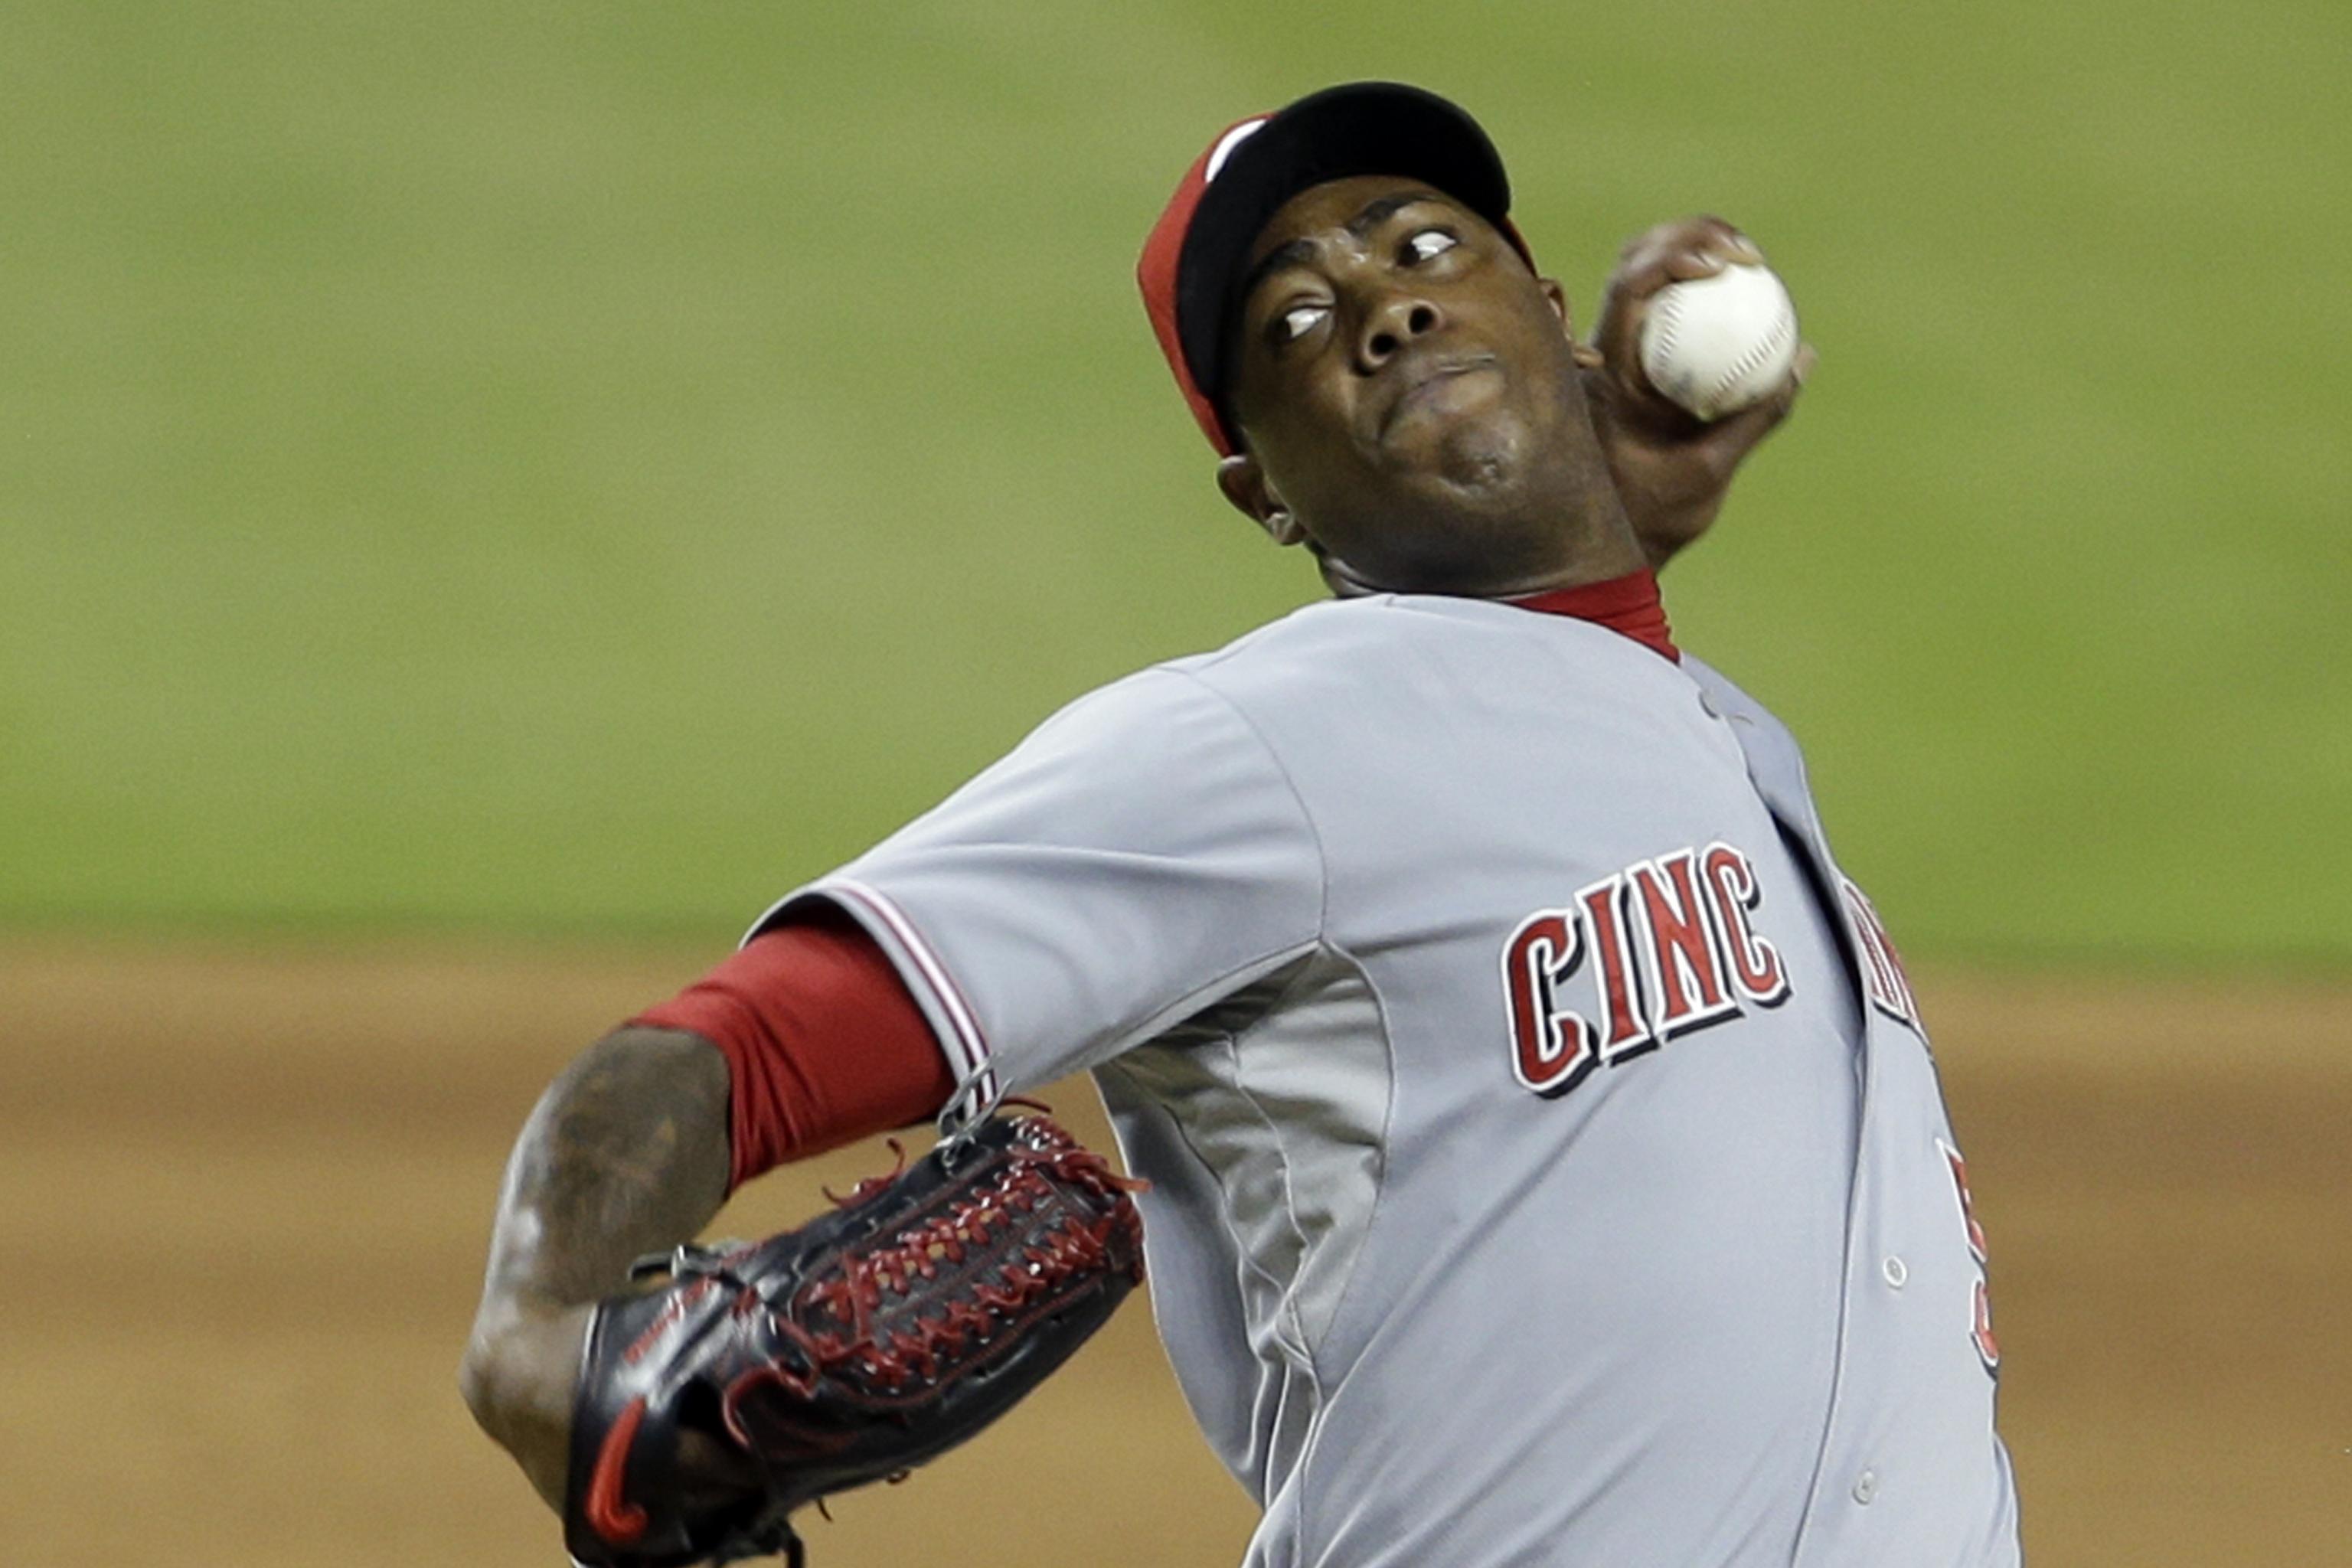 Rosenthal: Royals looking to move Aroldis Chapman early or package